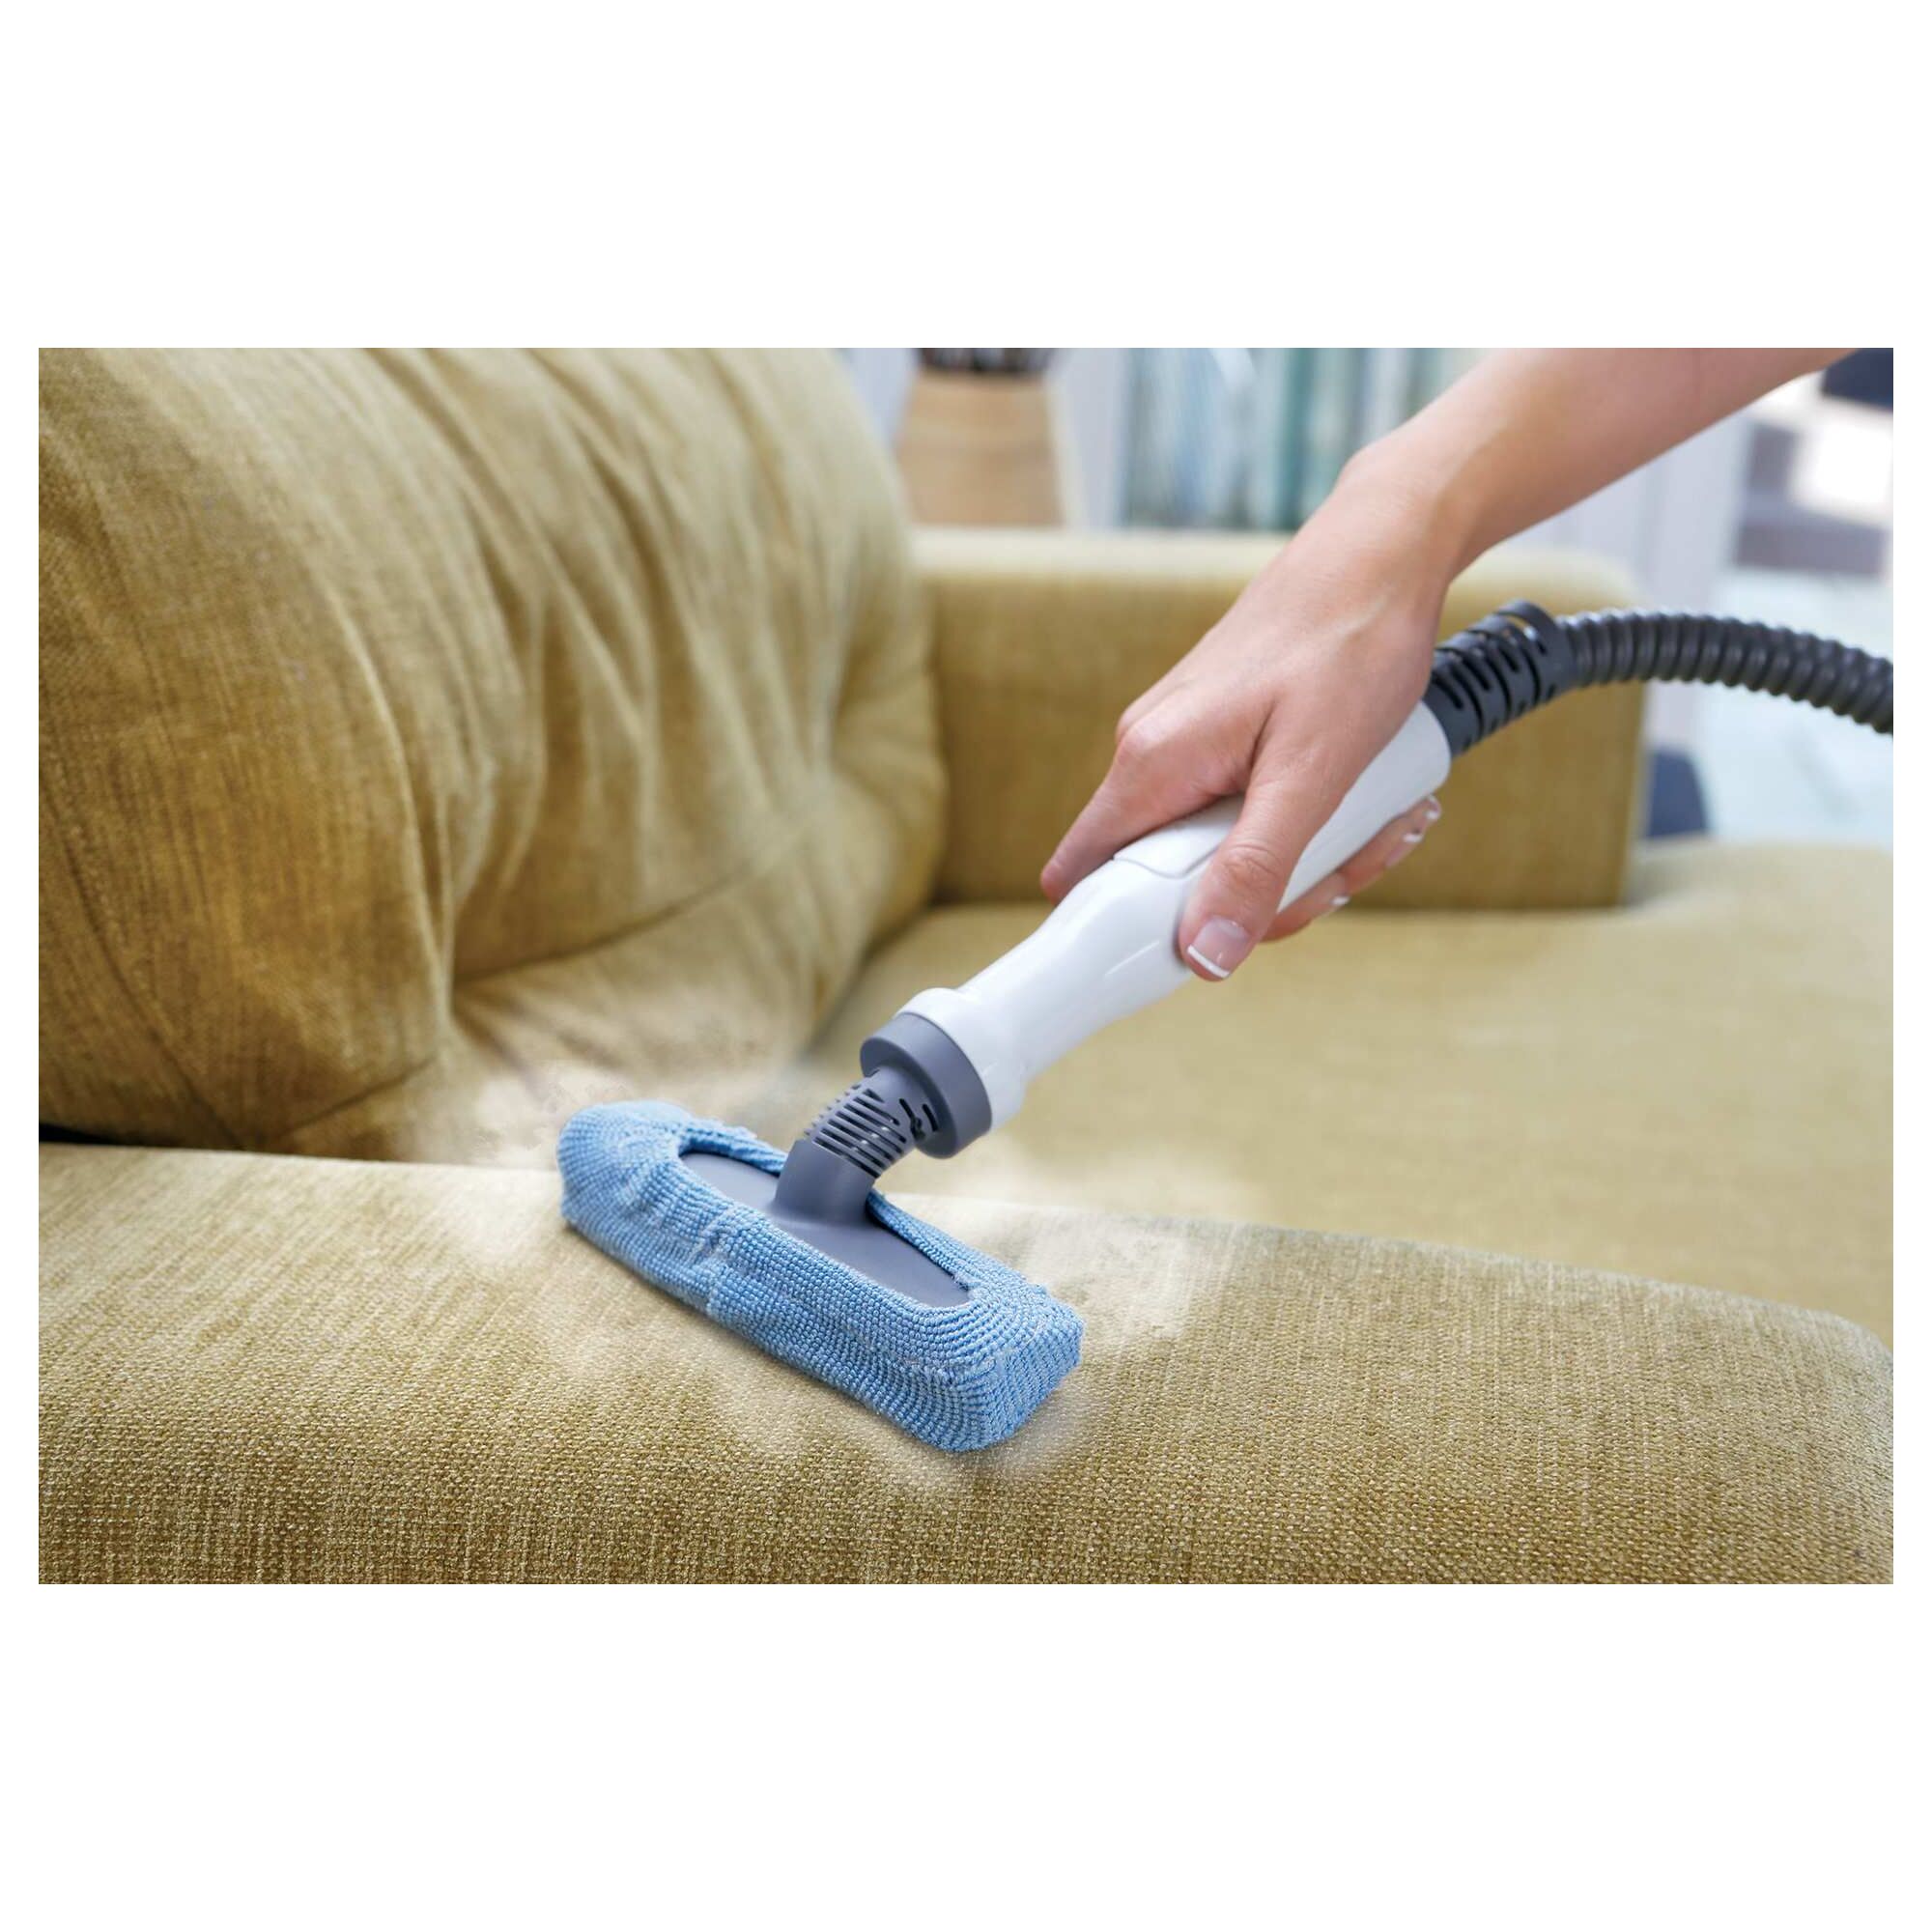 Portable steamer being used on a couch